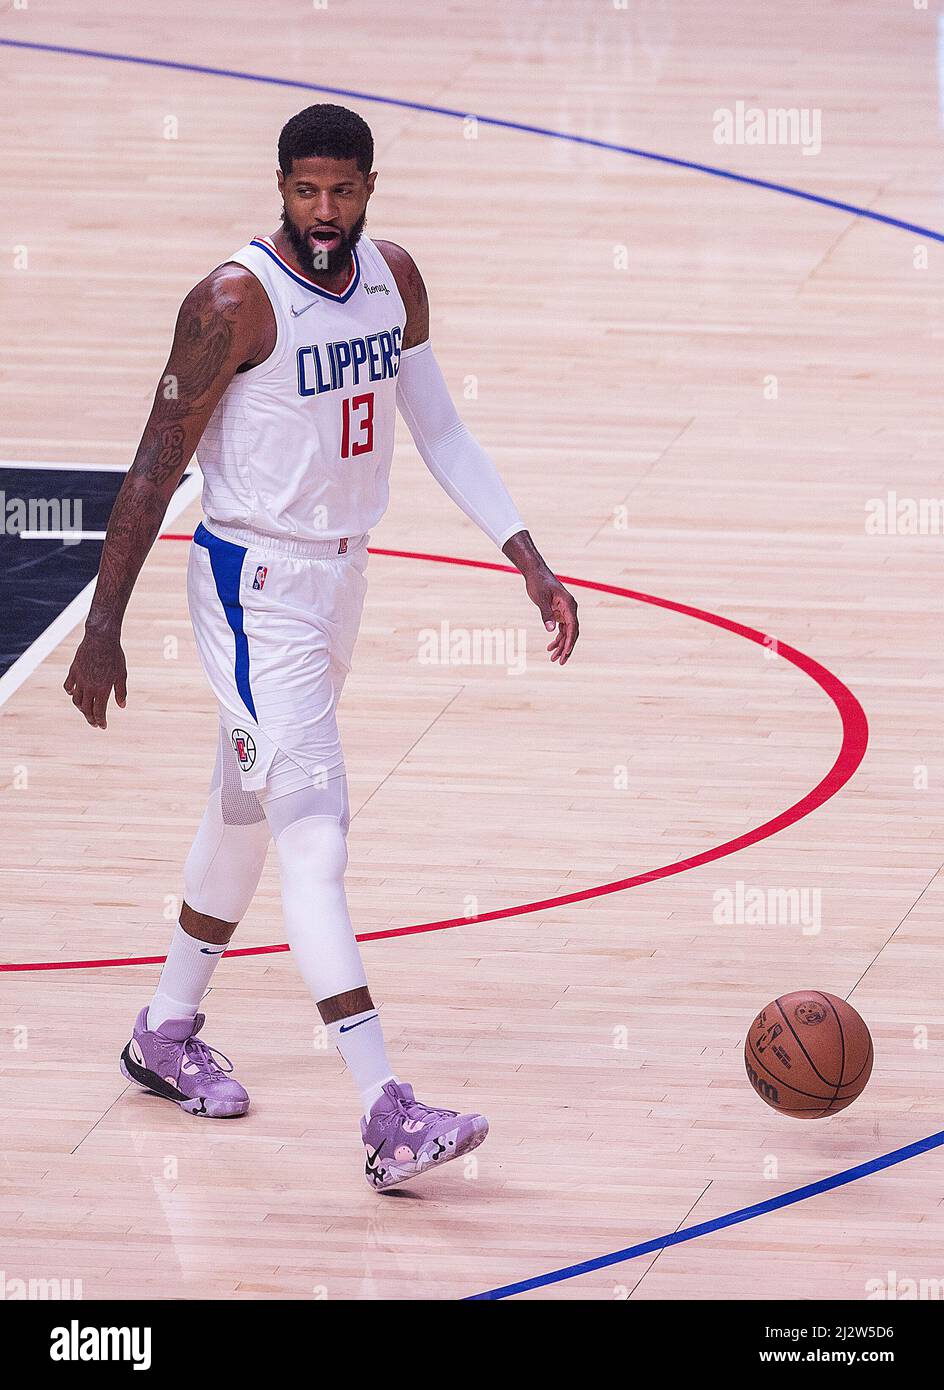 April 3, 2022, Los Angeles, California, USA: Paul George #13 of the Los  Angeles Clippers during their NBA game against the New Orleans Pelicans on  Sunday April 3, 2022 at Crypto.com Arena